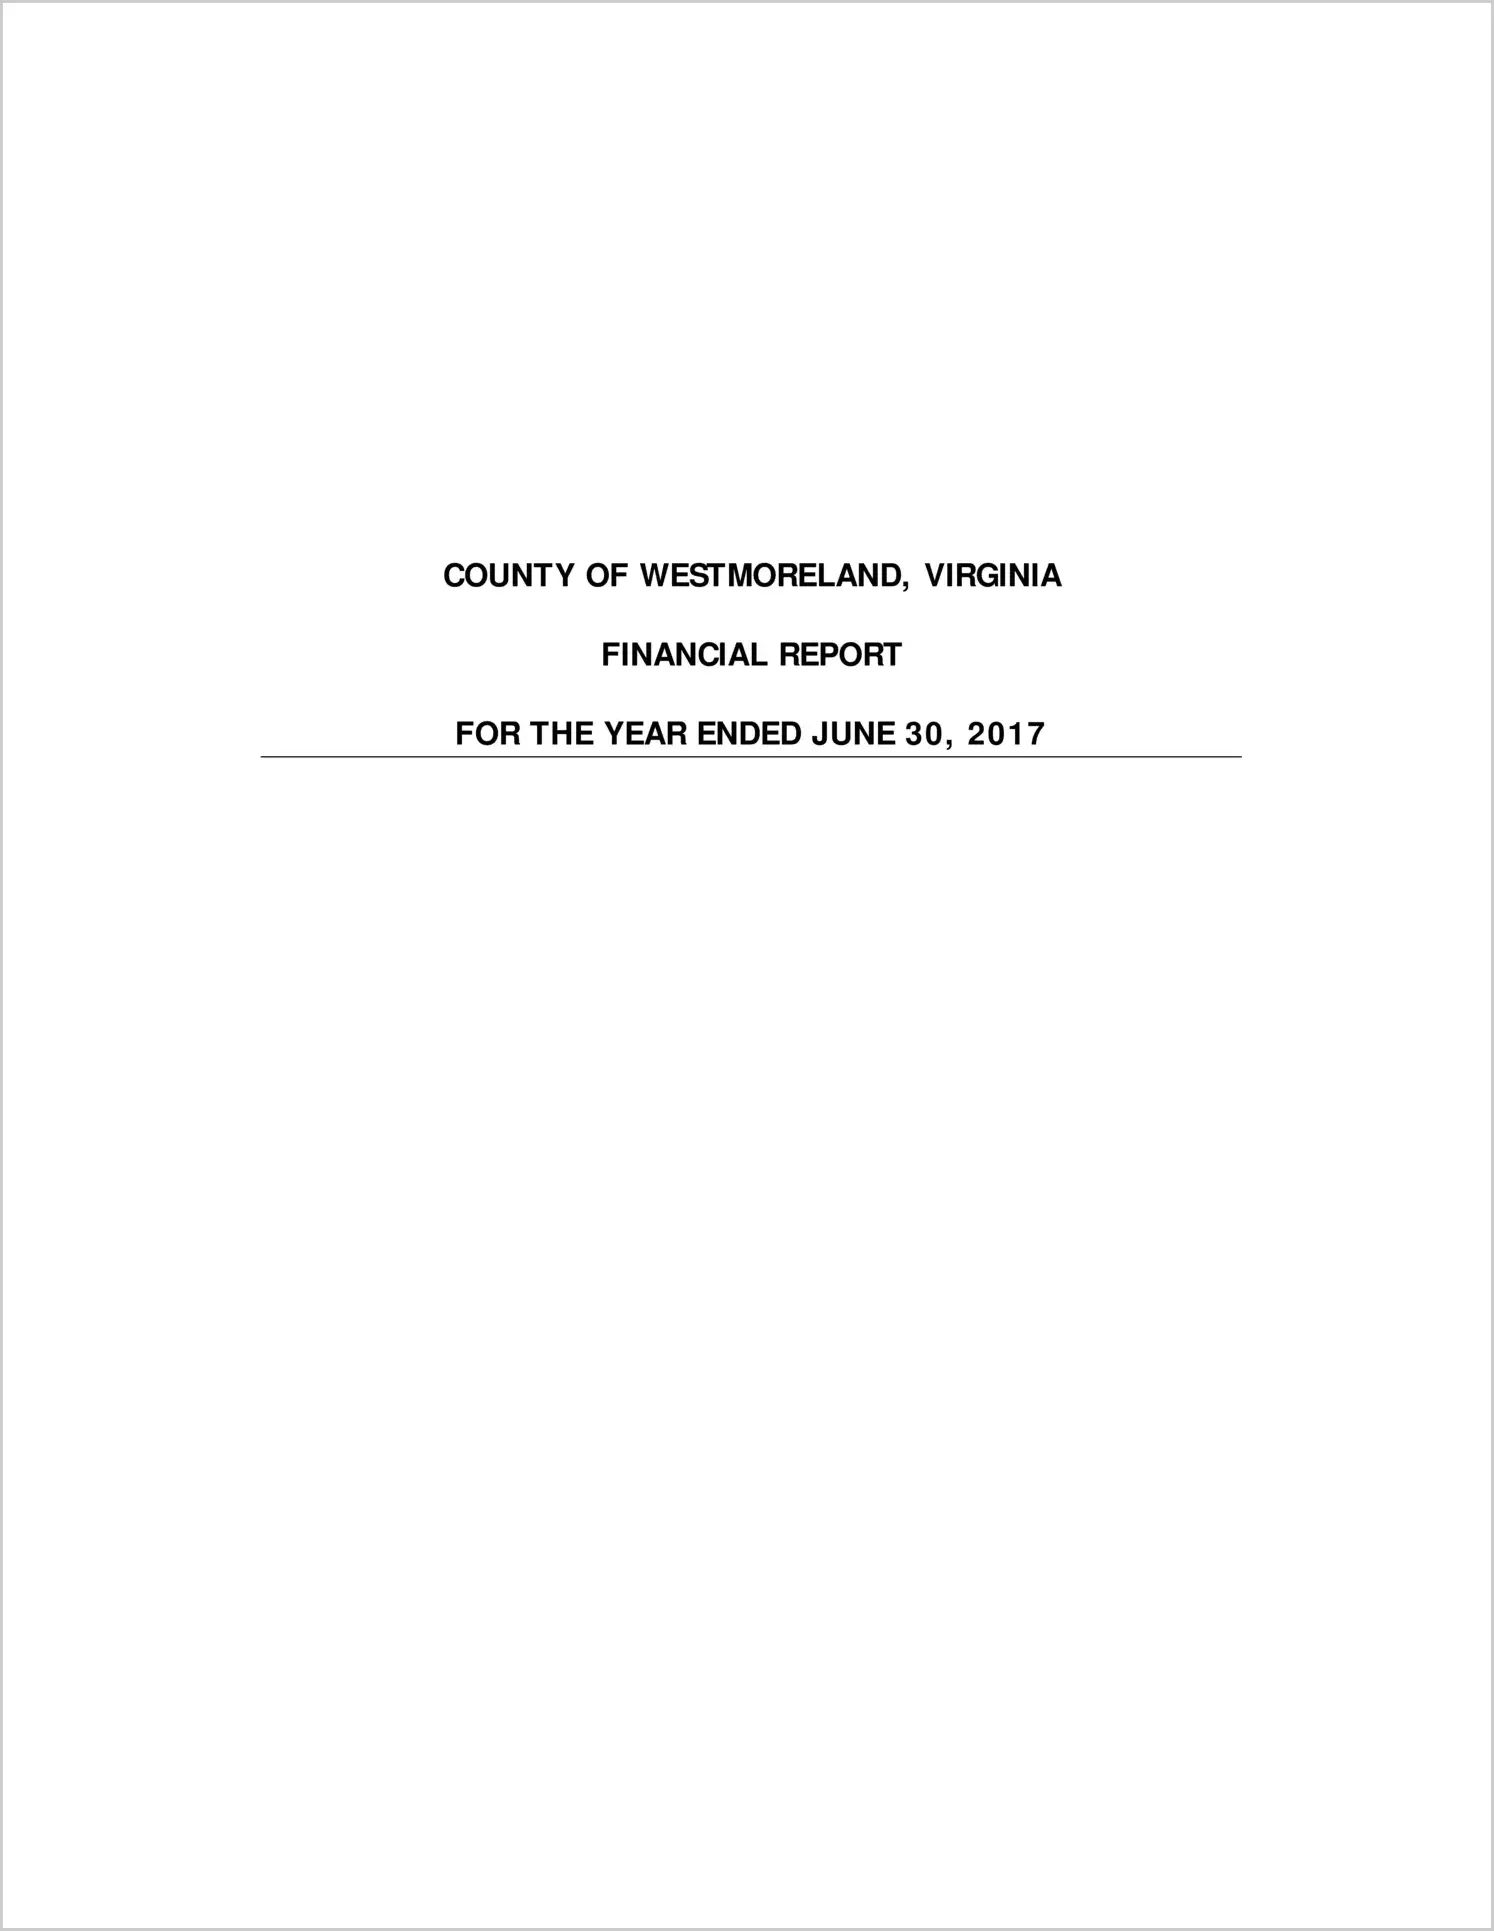 2017 Annual Financial Report for County of Westmoreland